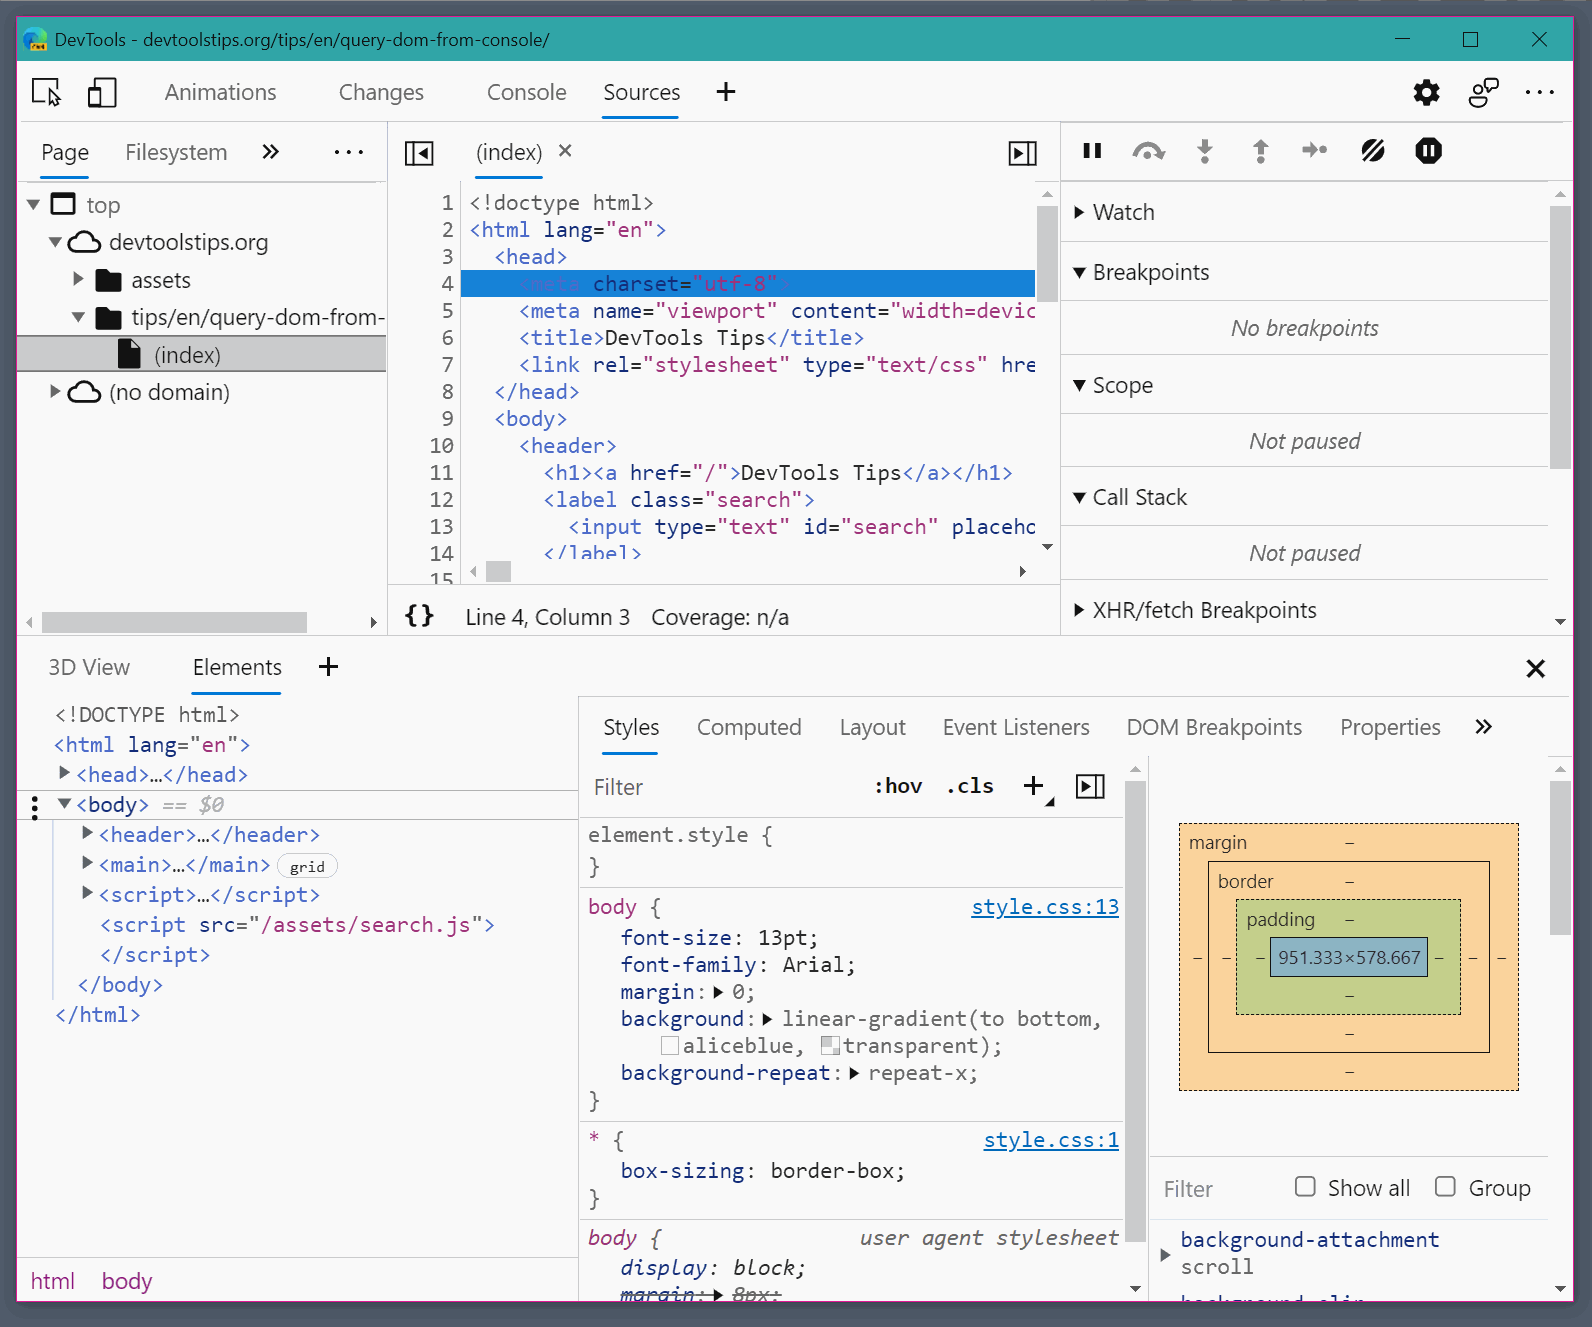 Animation of the DevTools tooltips in Edge.